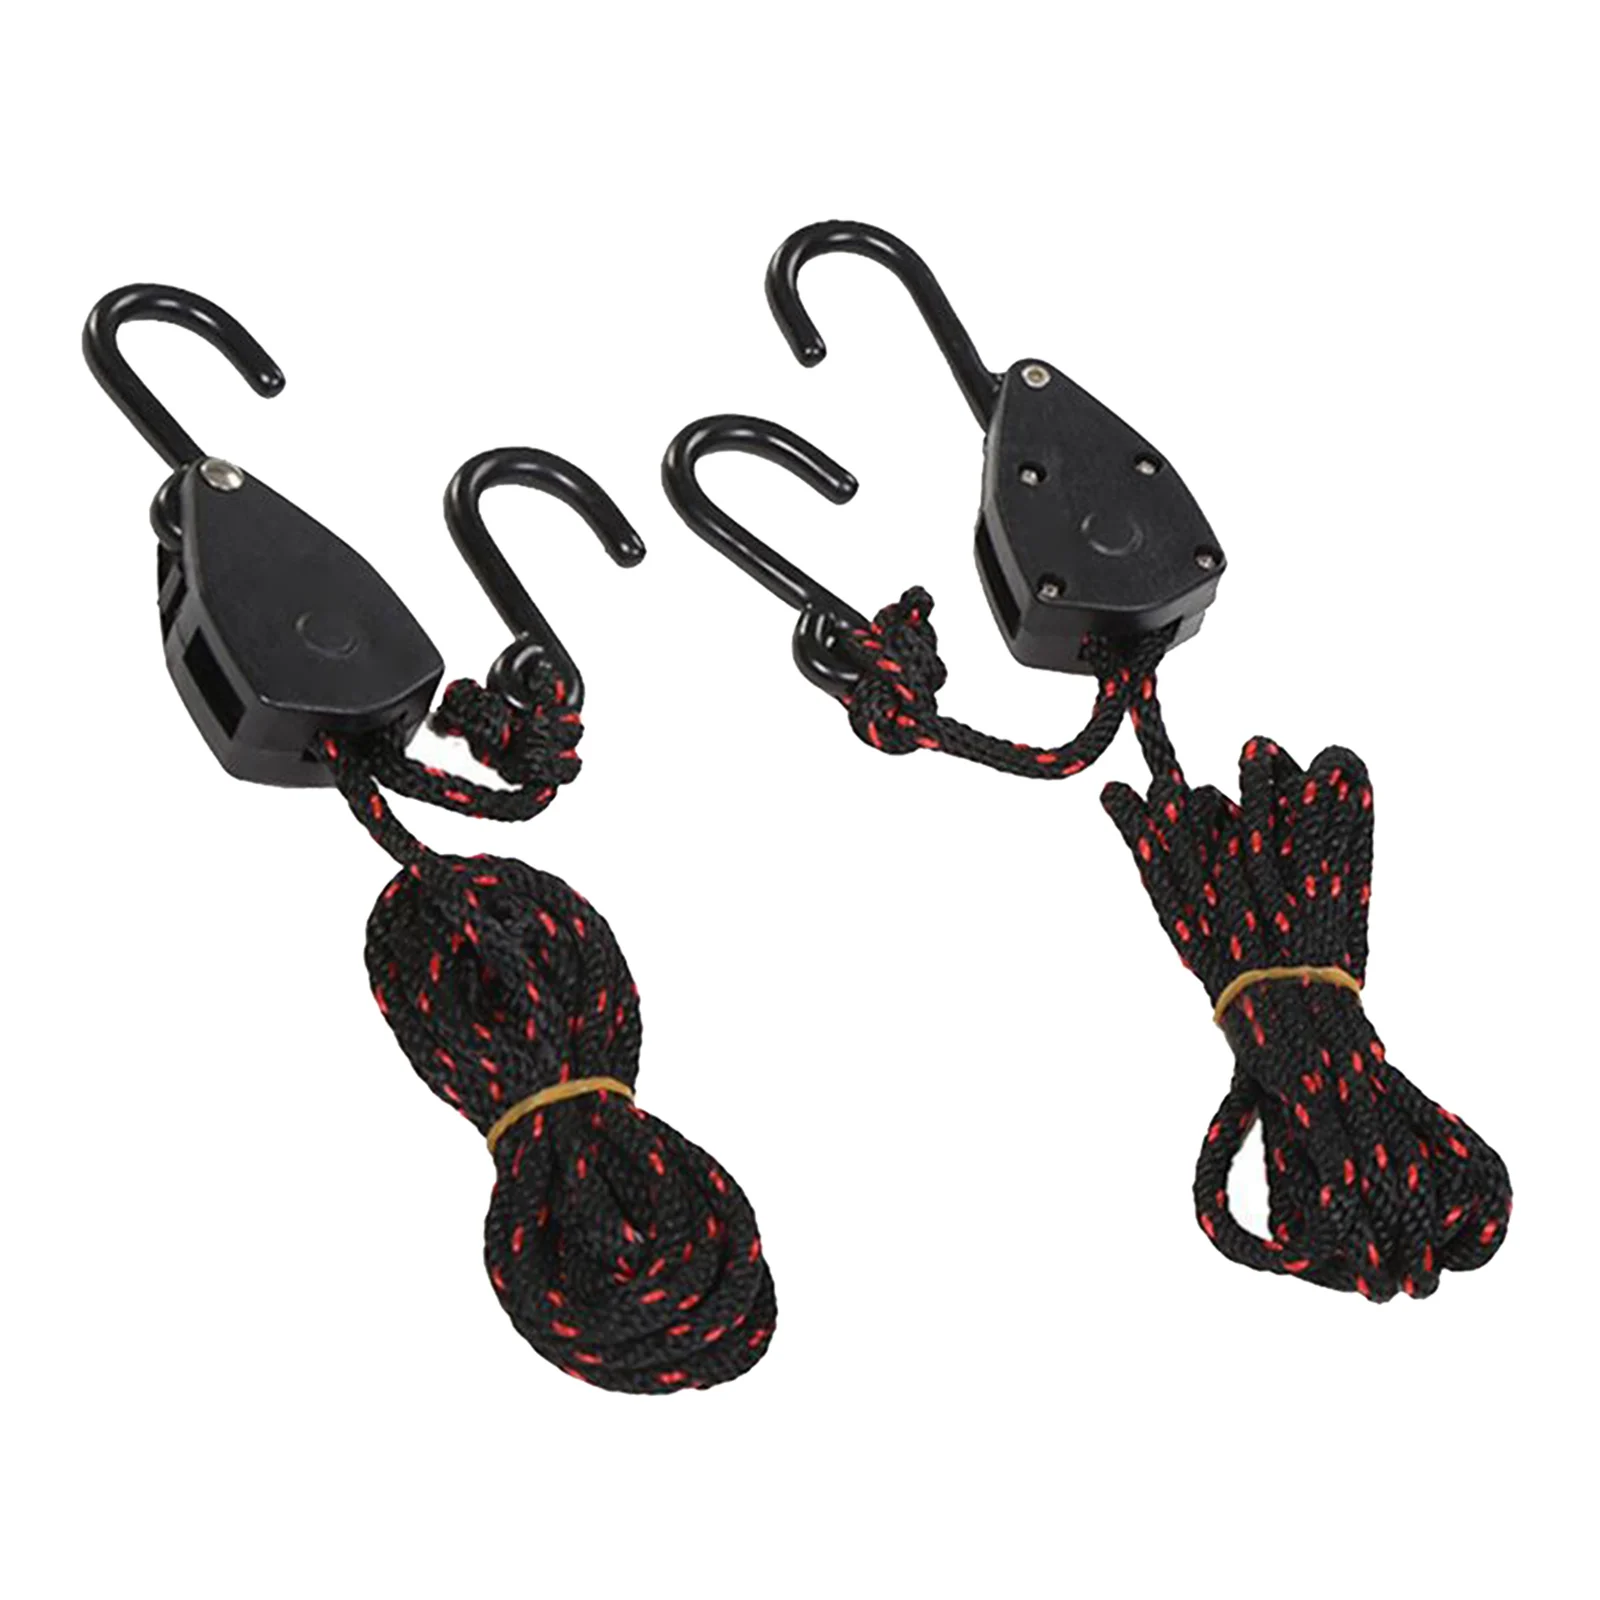 (Set of 2) - AA Products Ratchet Kayak And Canoe Bow And Stern Tie Down